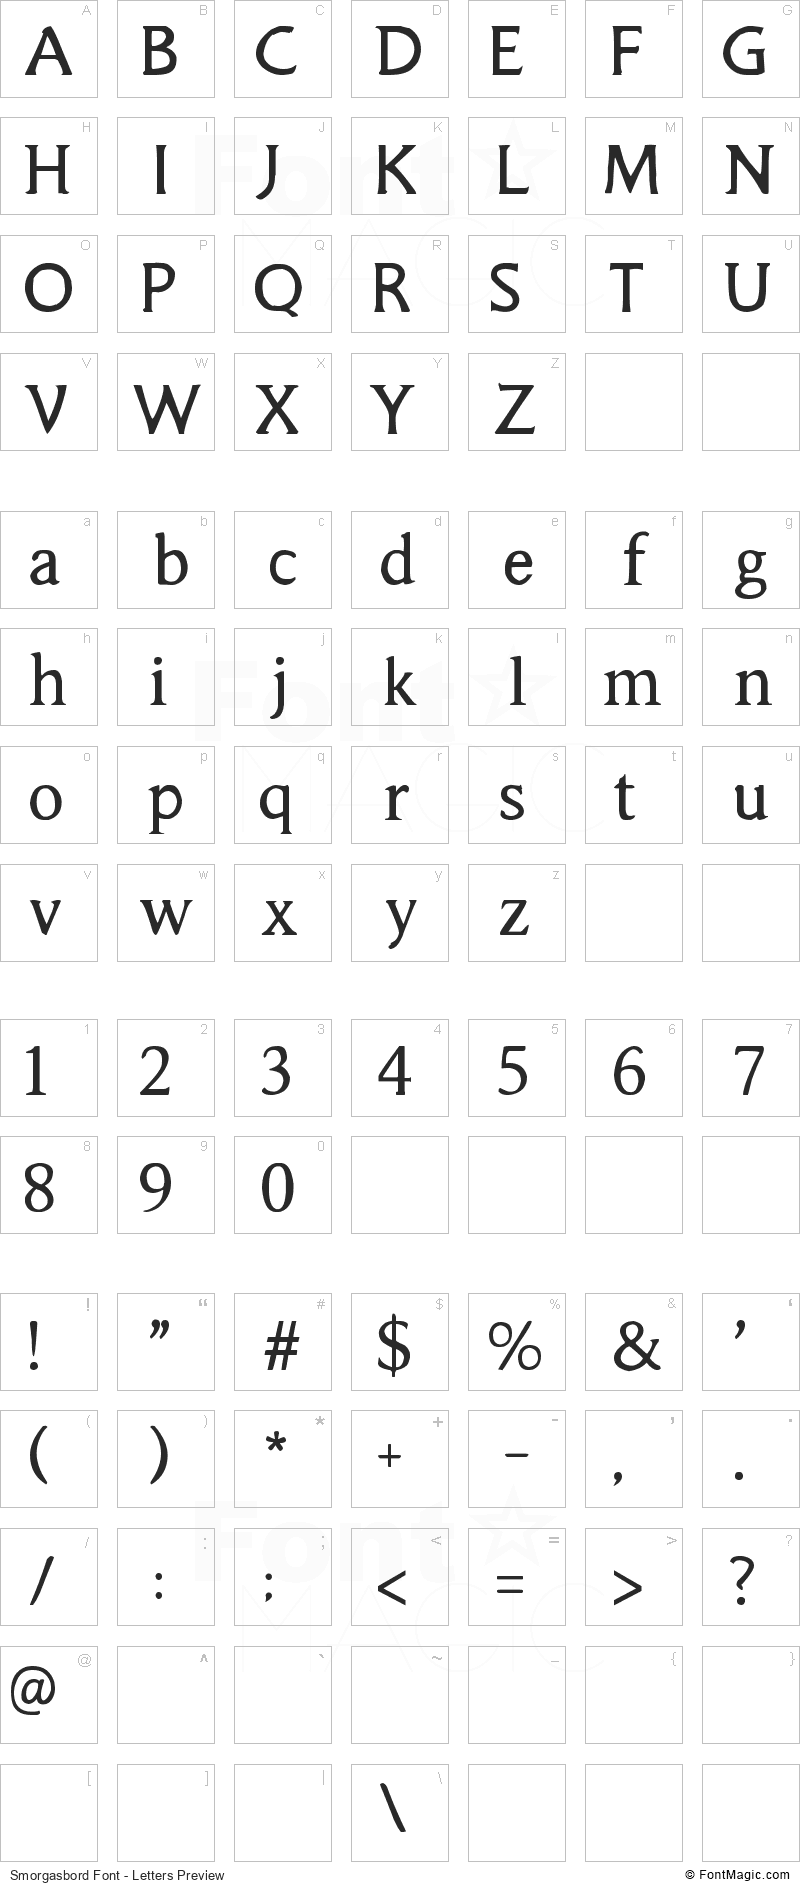 Smorgasbord Font - All Latters Preview Chart